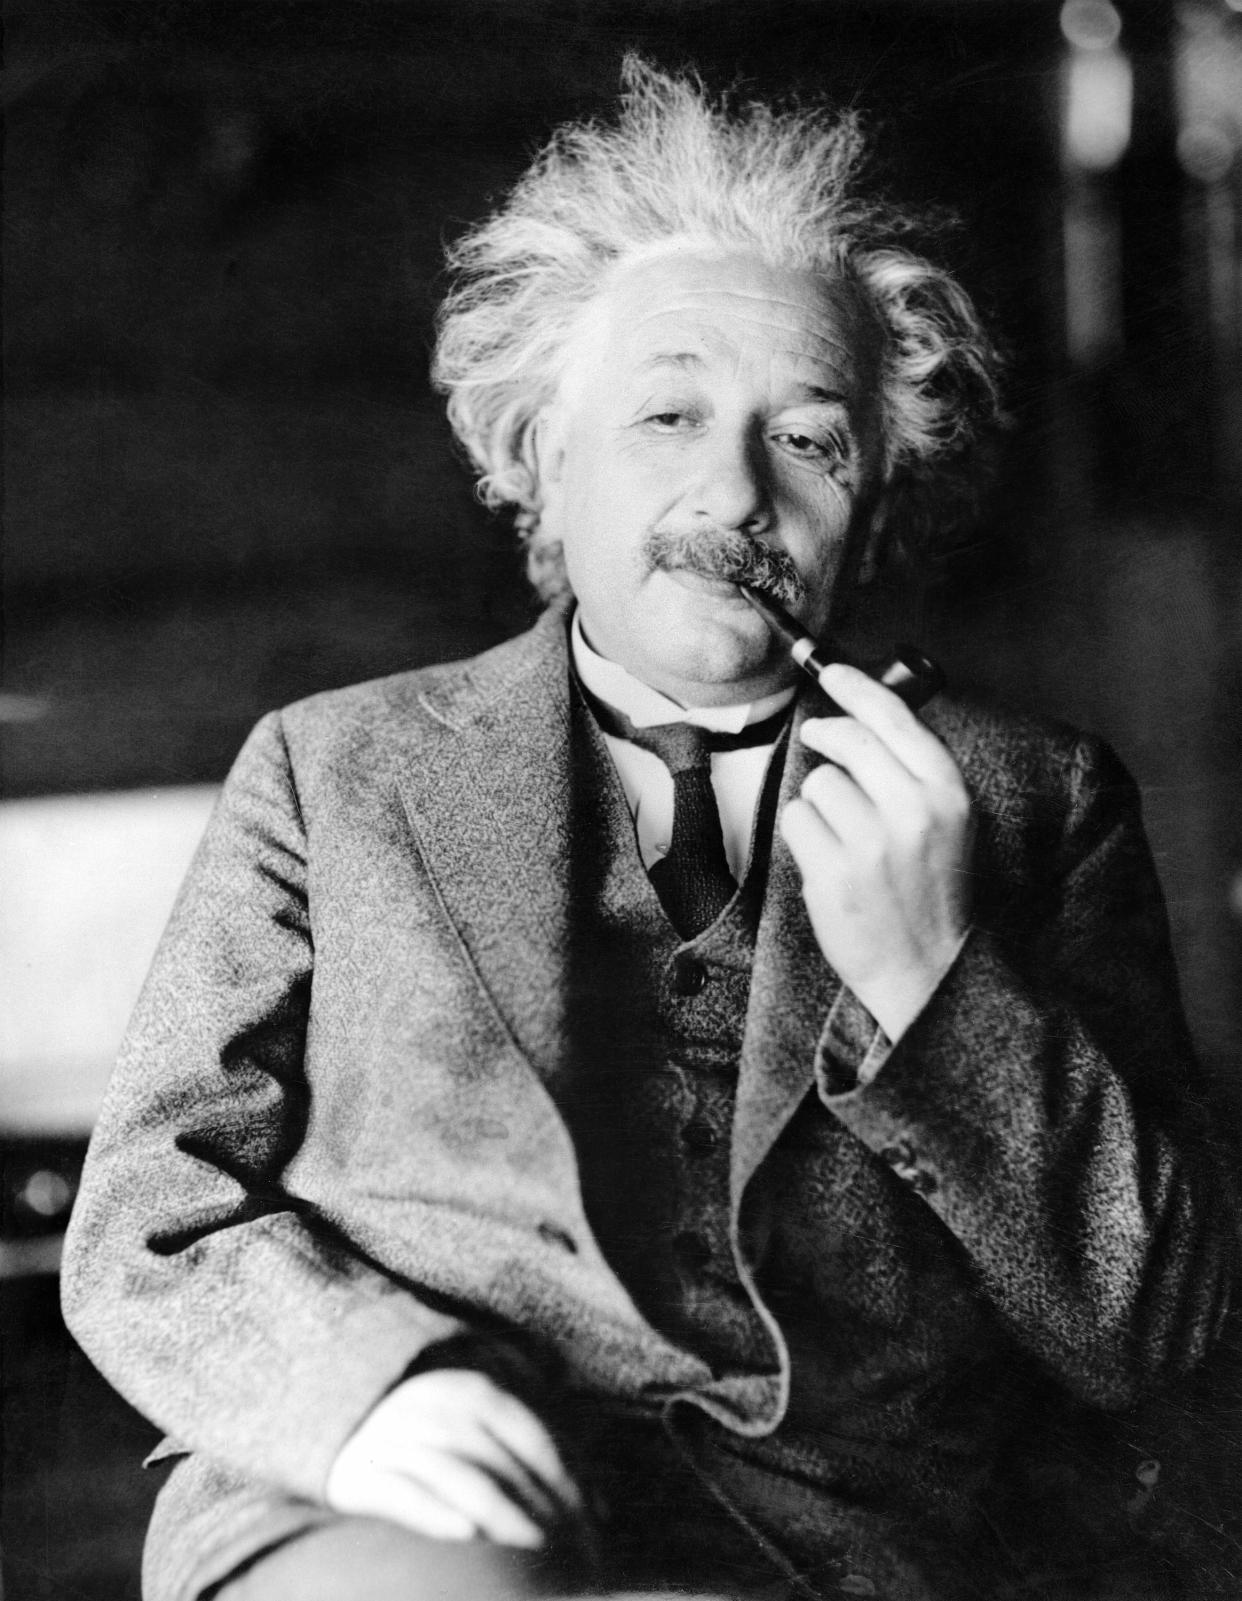 This undated file photo shows famed physicist Albert Einstein. More than a decade before the Nazis seized power in Germany, Albert Einstein was on the run and already fearful for his country’s future, according to a newly revealed handwritten letter. (AP Photo, File)